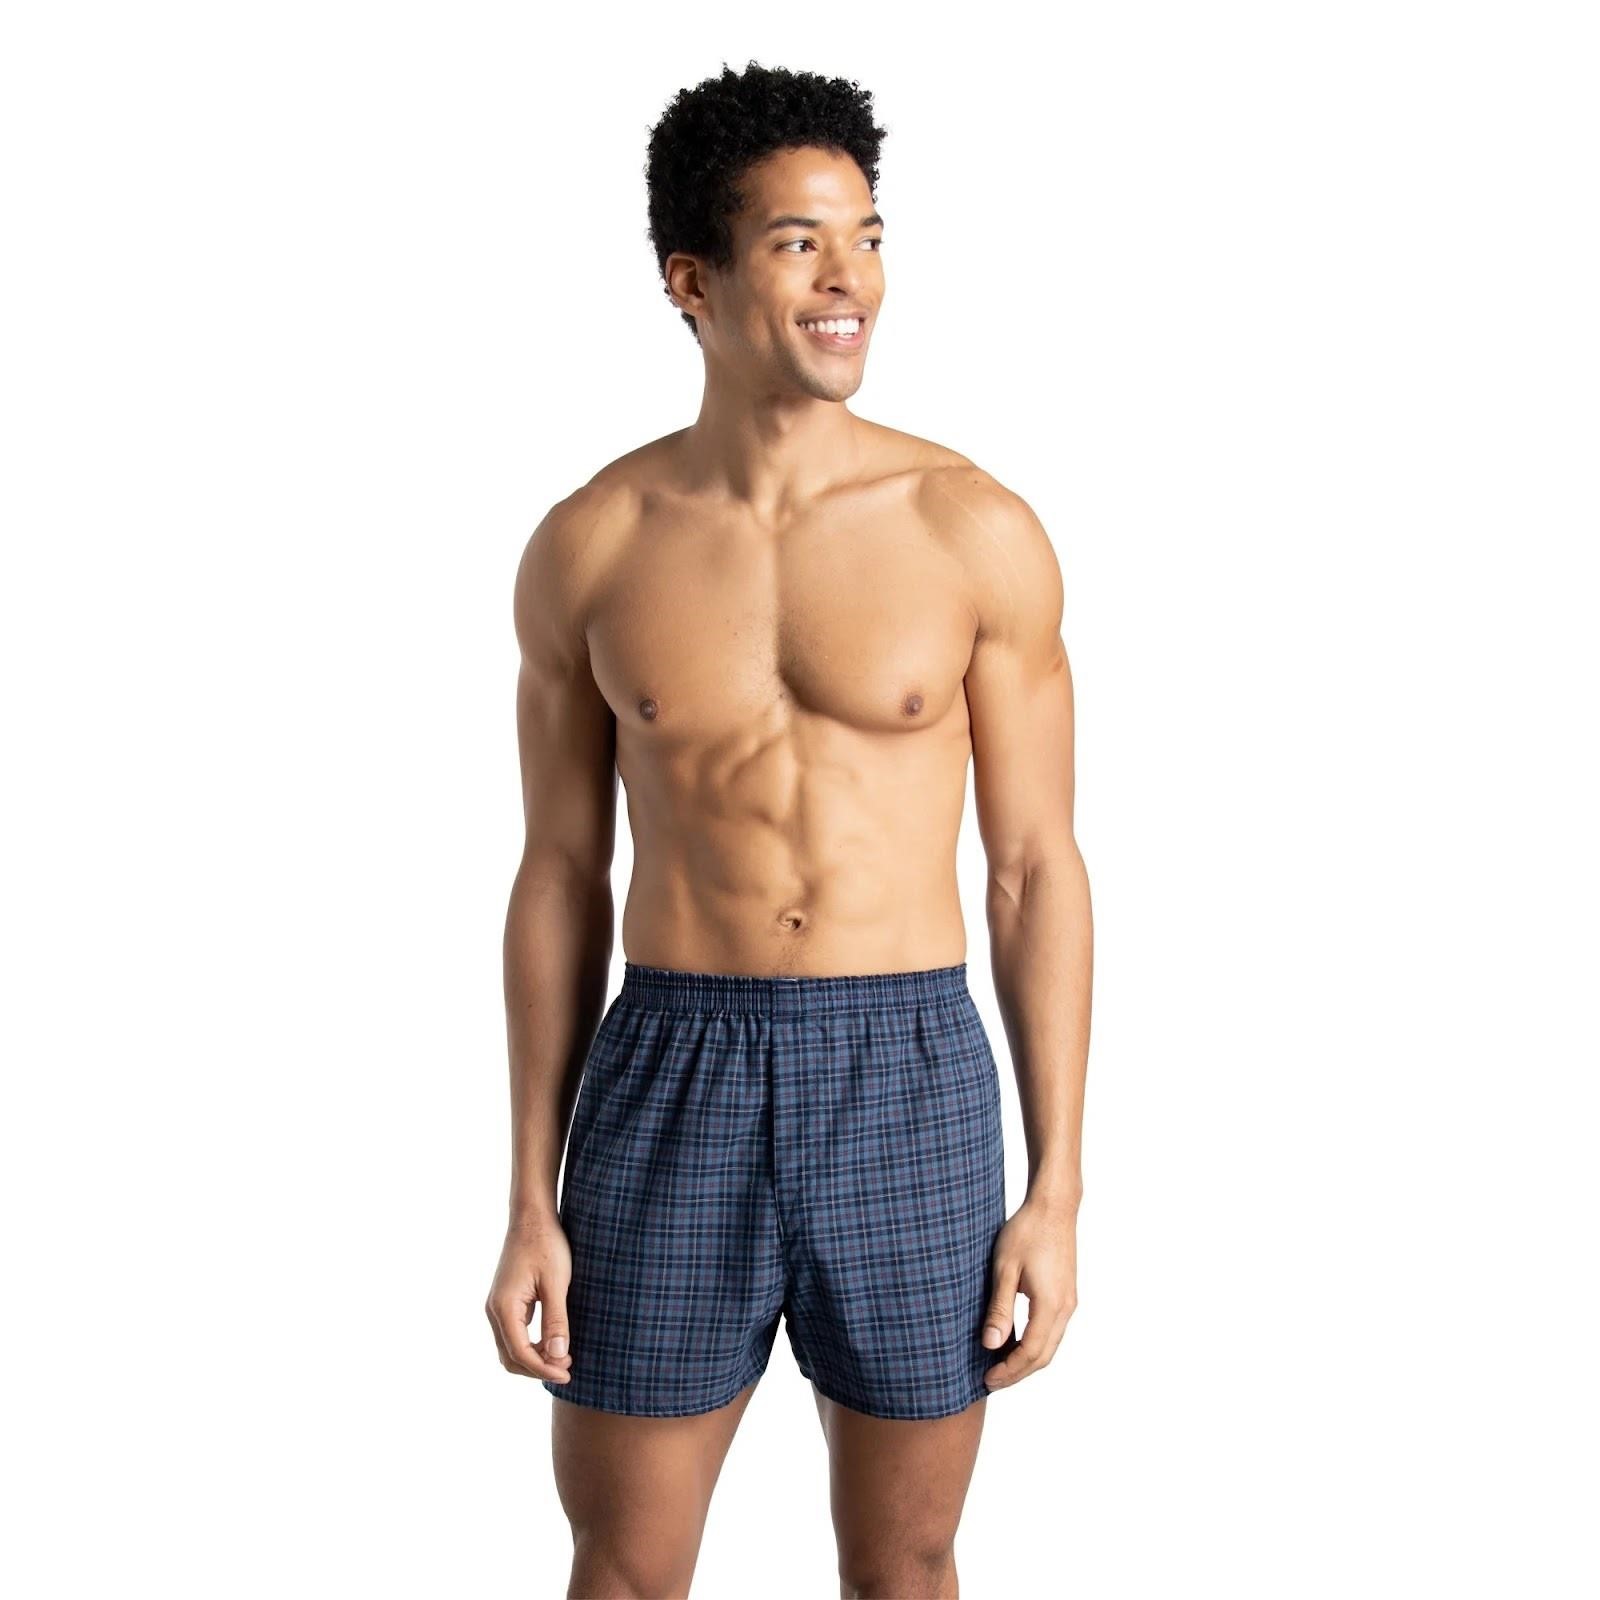 XL Fruit of the Loom Men's Woven Boxers 5pk A95